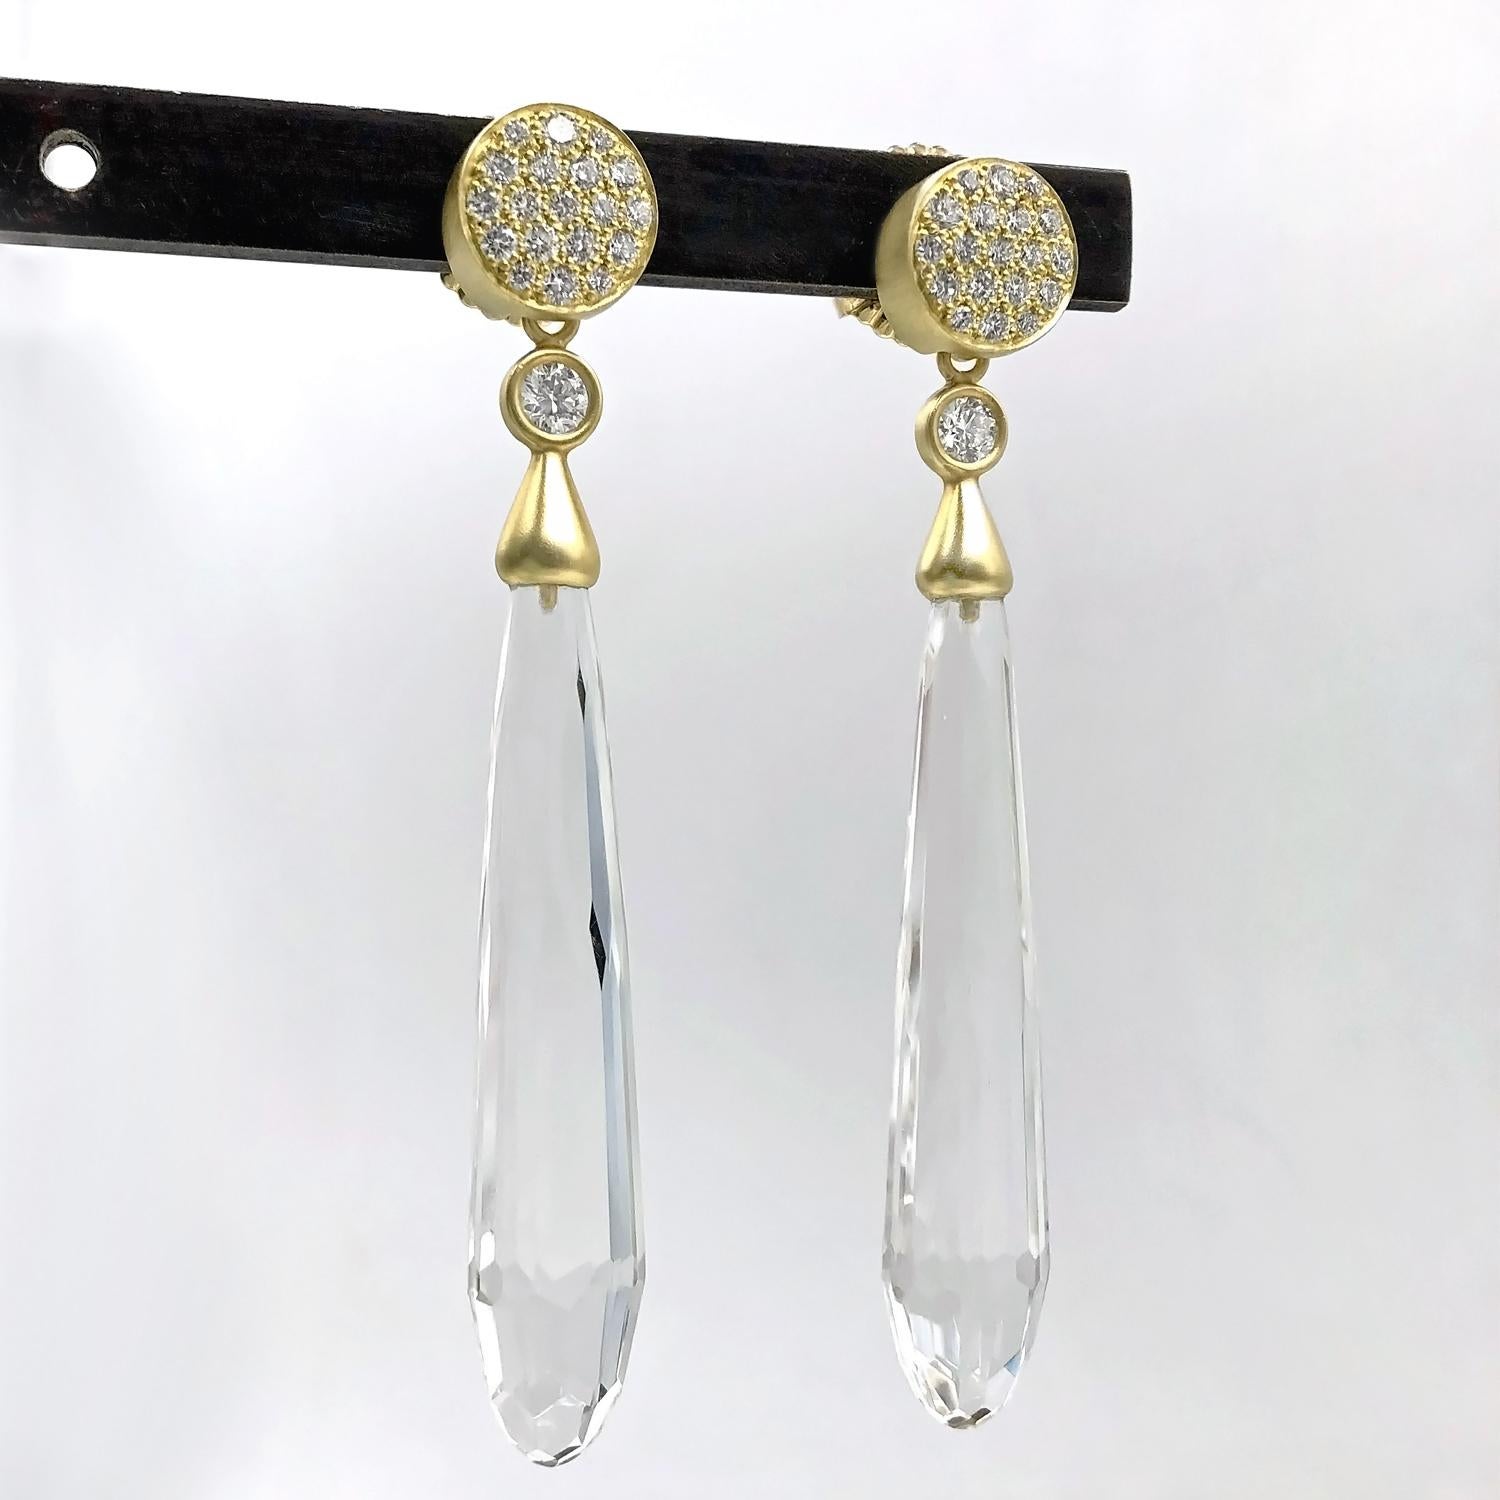 Two Earrings in One! One-of-a-Kind Drop Earrings hand-fabricated by jewelry artist Susan Sadler showcasing a stunning matched pair of DETACHABLE long faceted rock crystal drops set beneath two round brilliant-cut F/vs1 white diamonds totaling 0.18